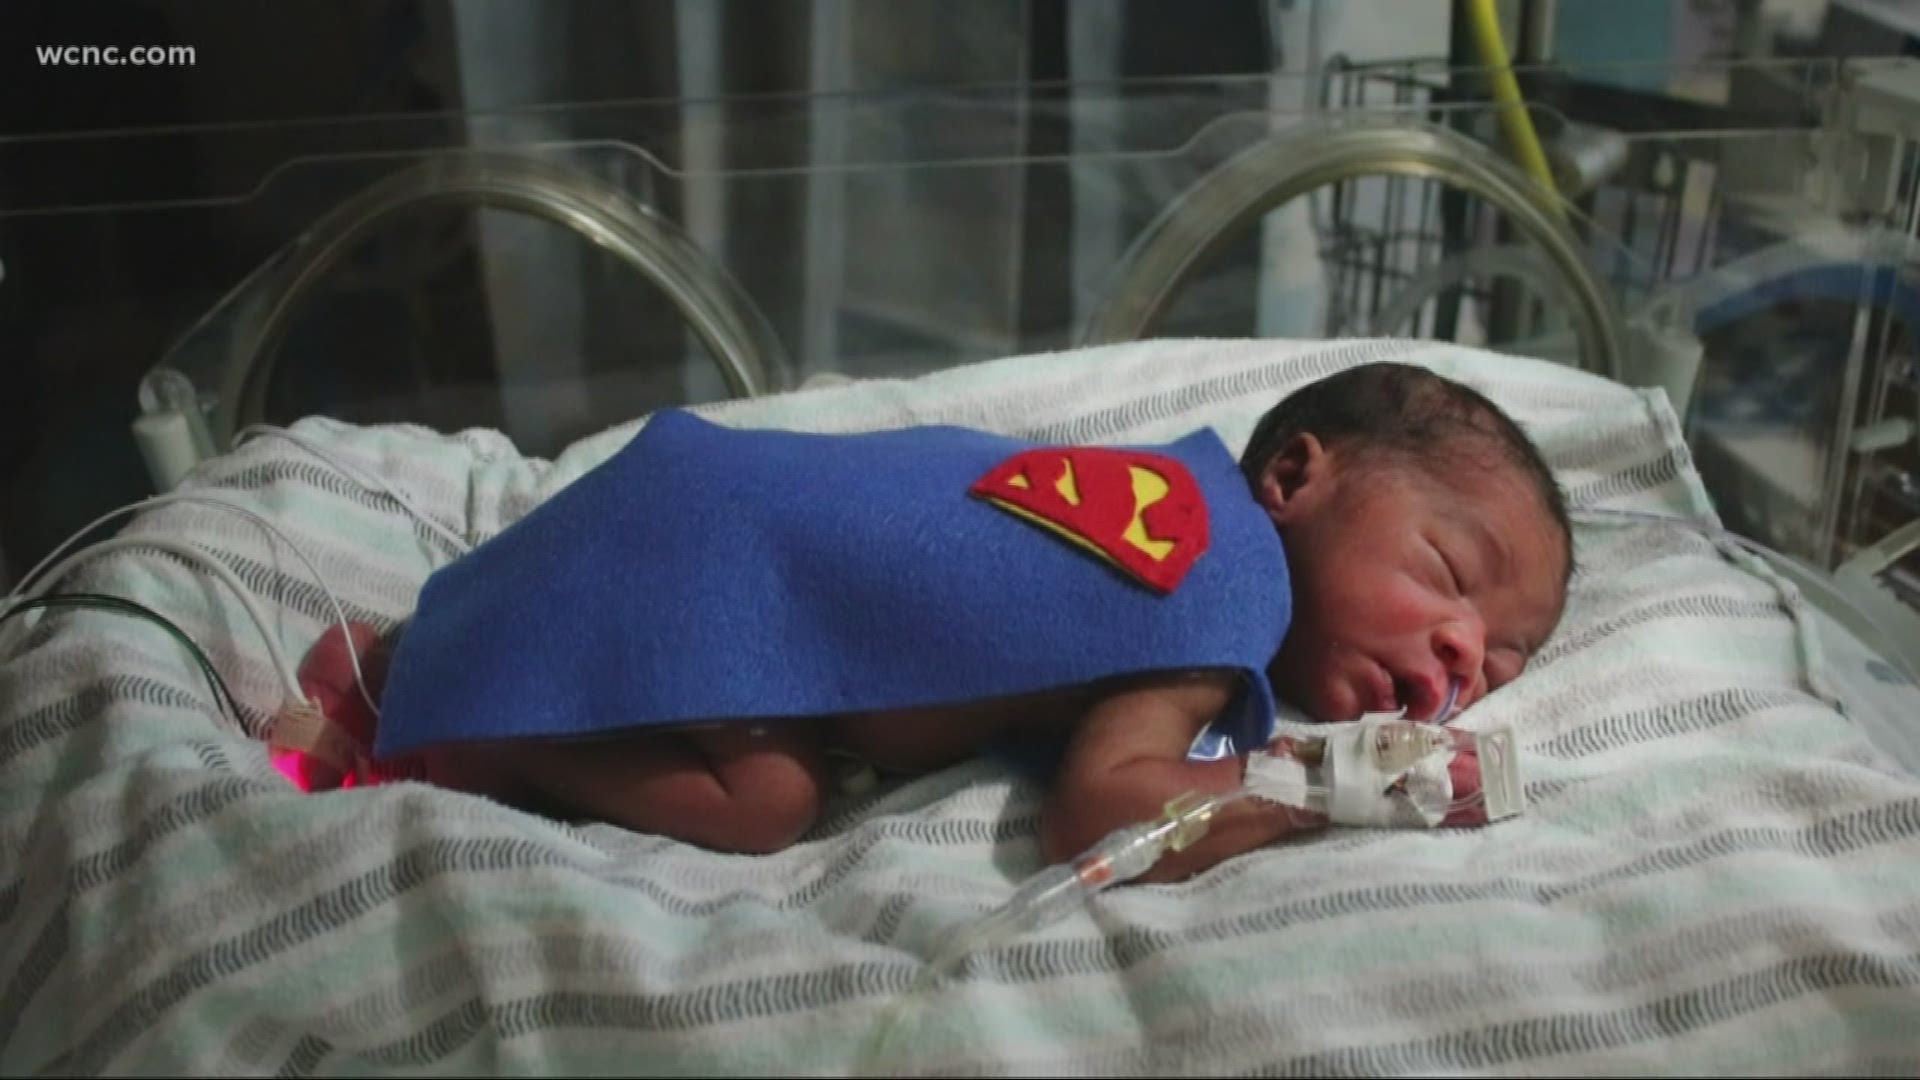 "Everyone’s heart melts when they see them," said Kasey Church, NICU nurse manager. "They’re super cute."